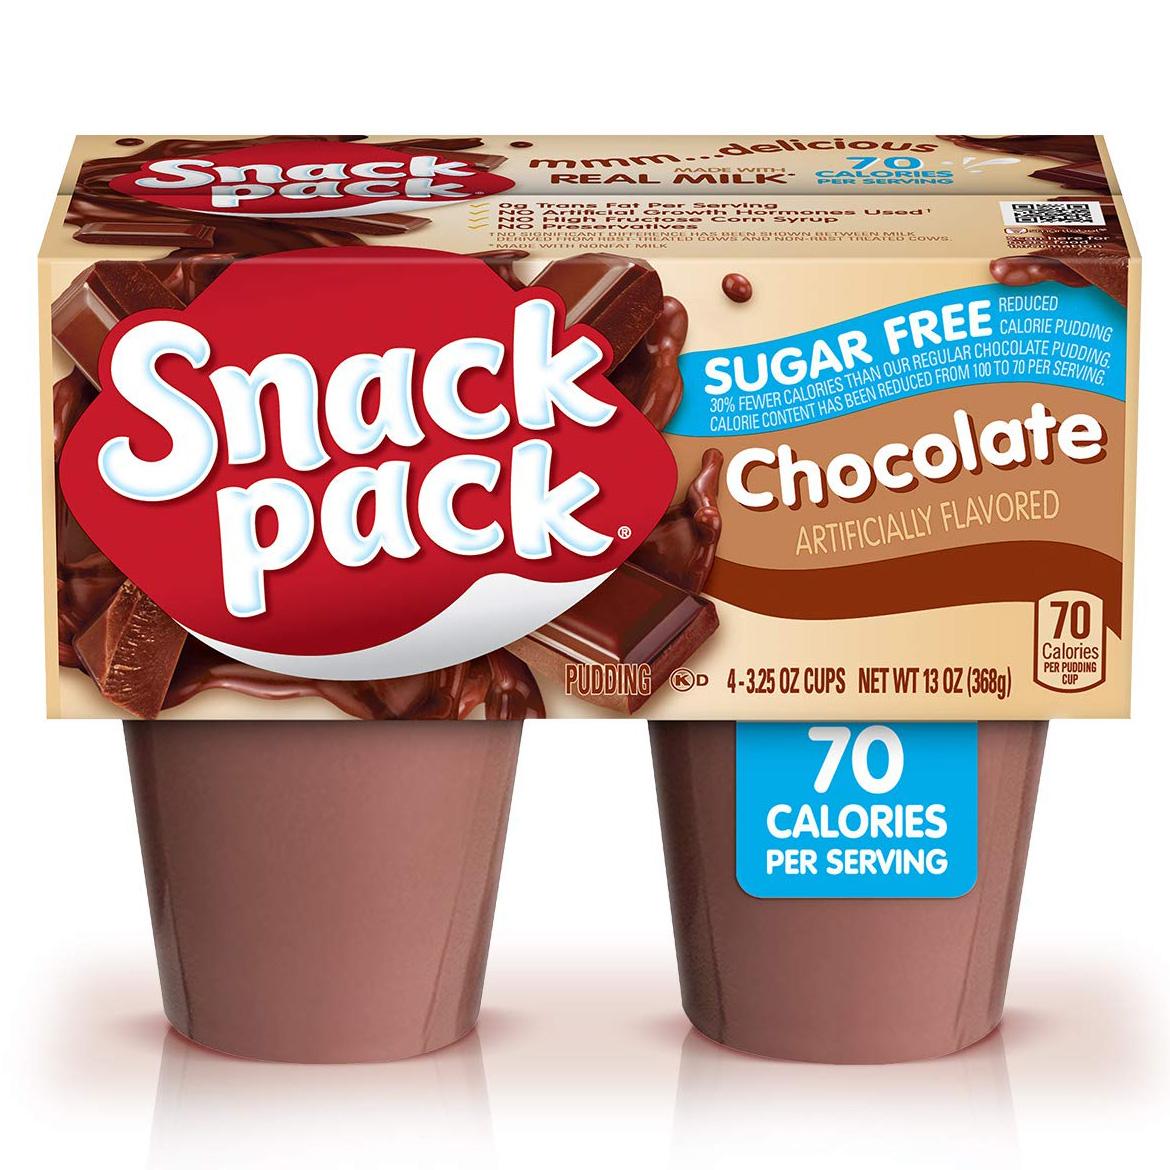 48 Snack Pack Chocolate Pudding Cups for $8.46 Shipped